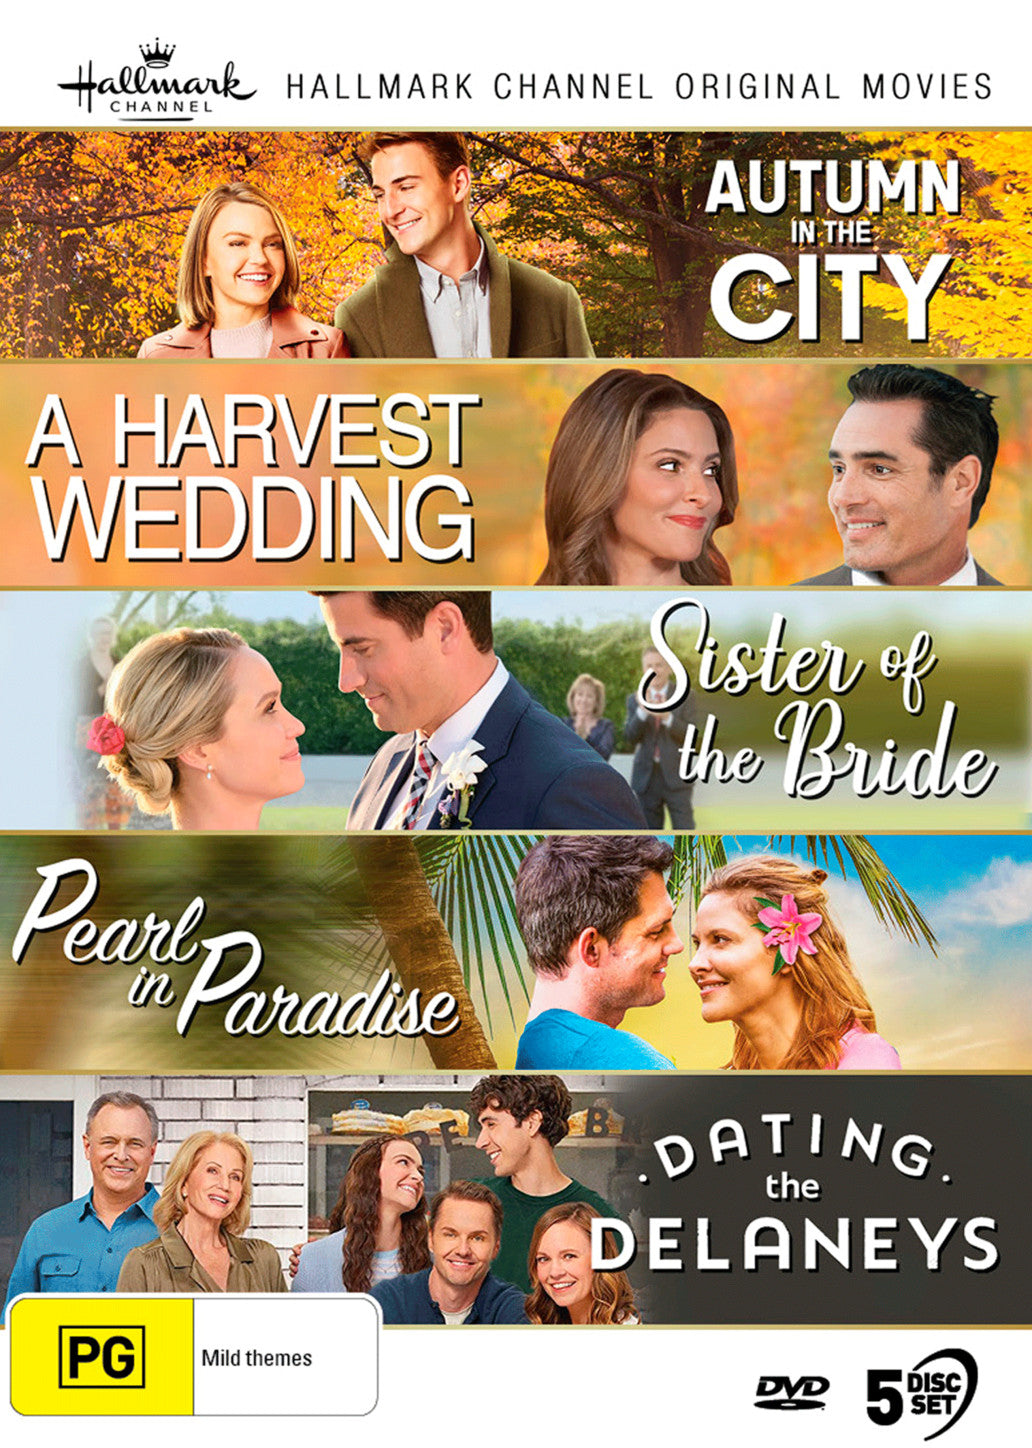 HALLMARK COLLECTION #19 (AUTUMN IN THE CITY / A HARVEST WEDDING / SISTER OF THE BRIDE / PEARL IN PARADISE / DATING THE DELANEYS)